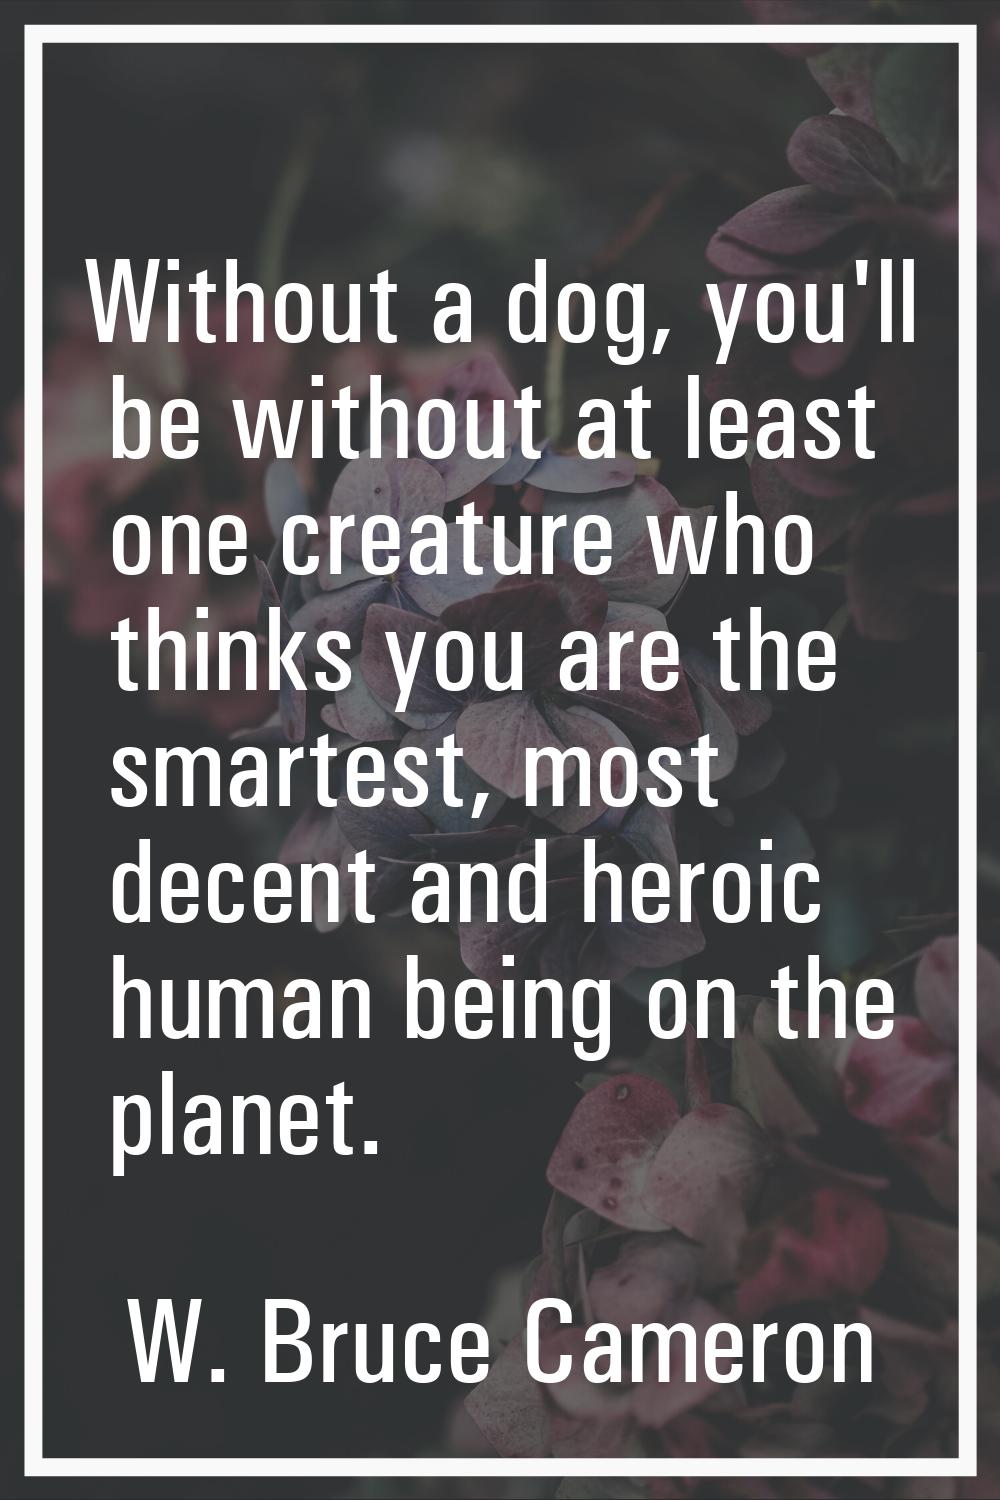 Without a dog, you'll be without at least one creature who thinks you are the smartest, most decent